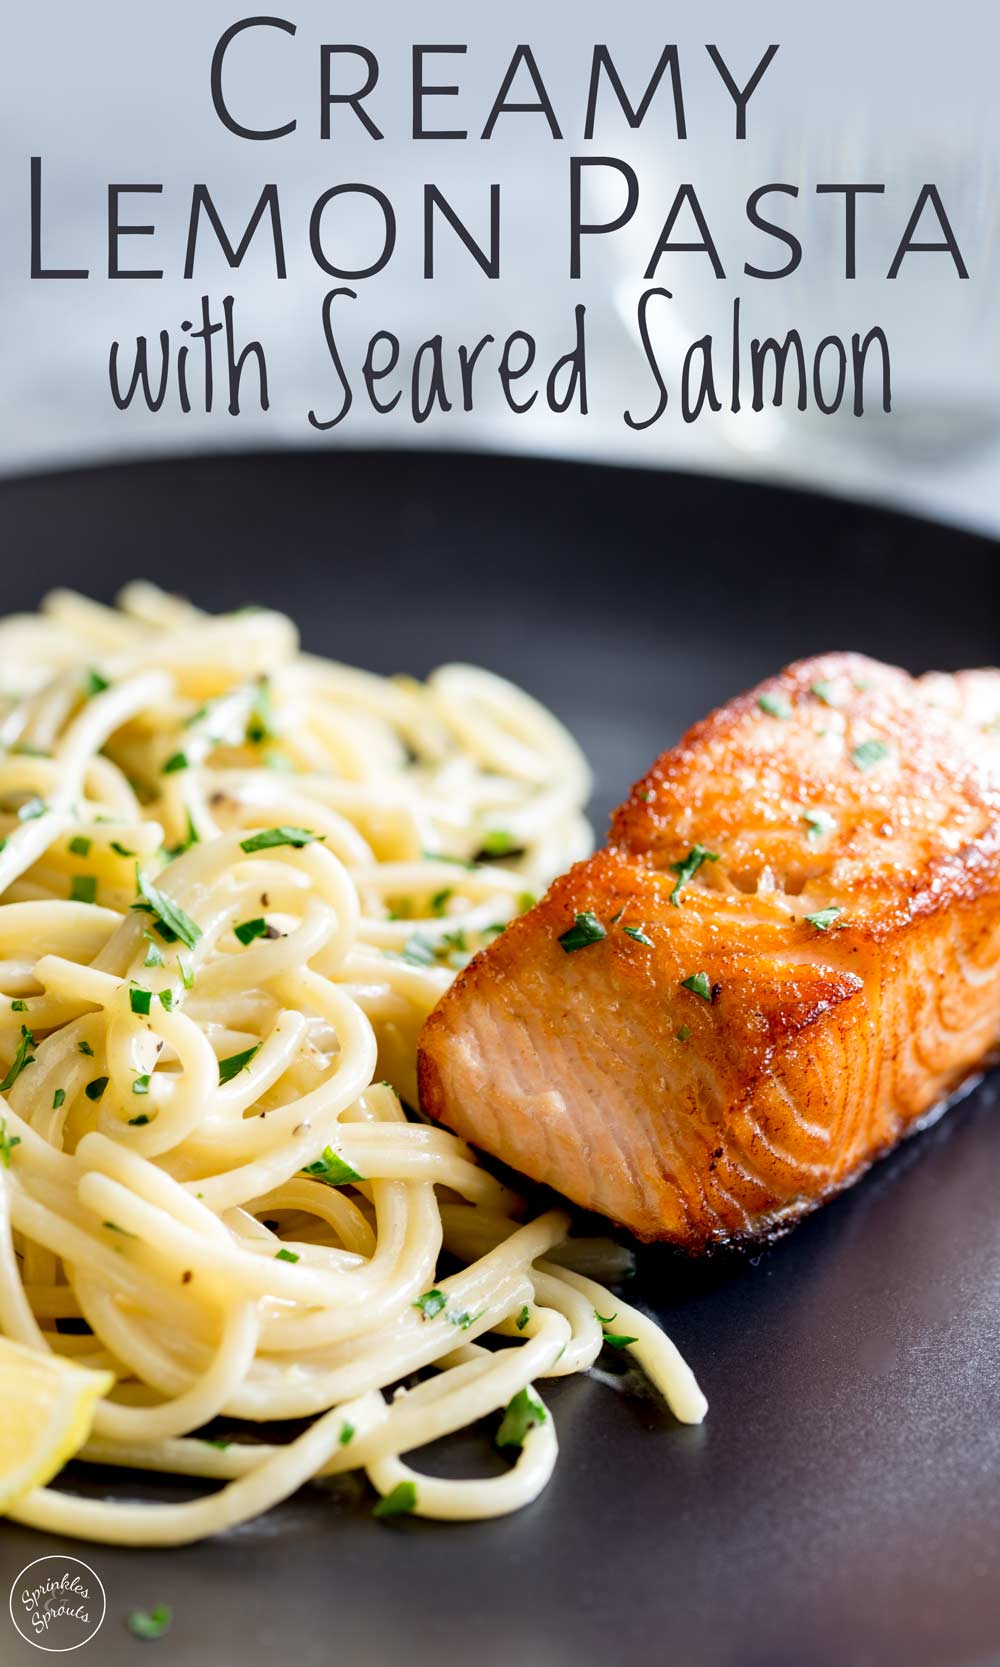 seared salmon and creamy pasta on a black plate with text at the top